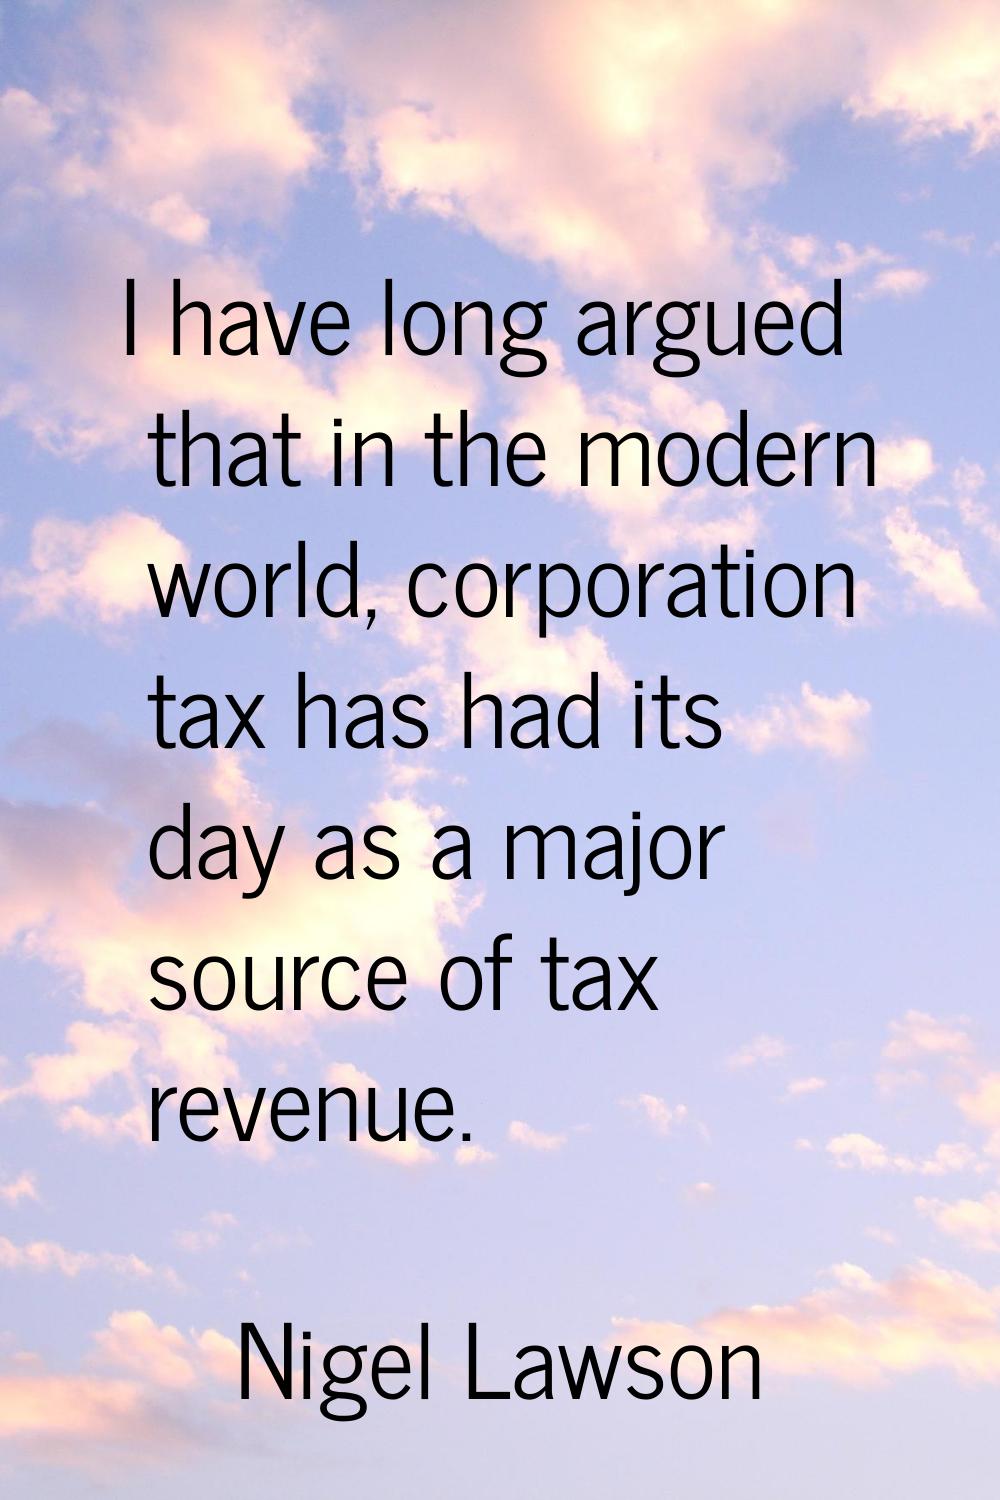 I have long argued that in the modern world, corporation tax has had its day as a major source of t